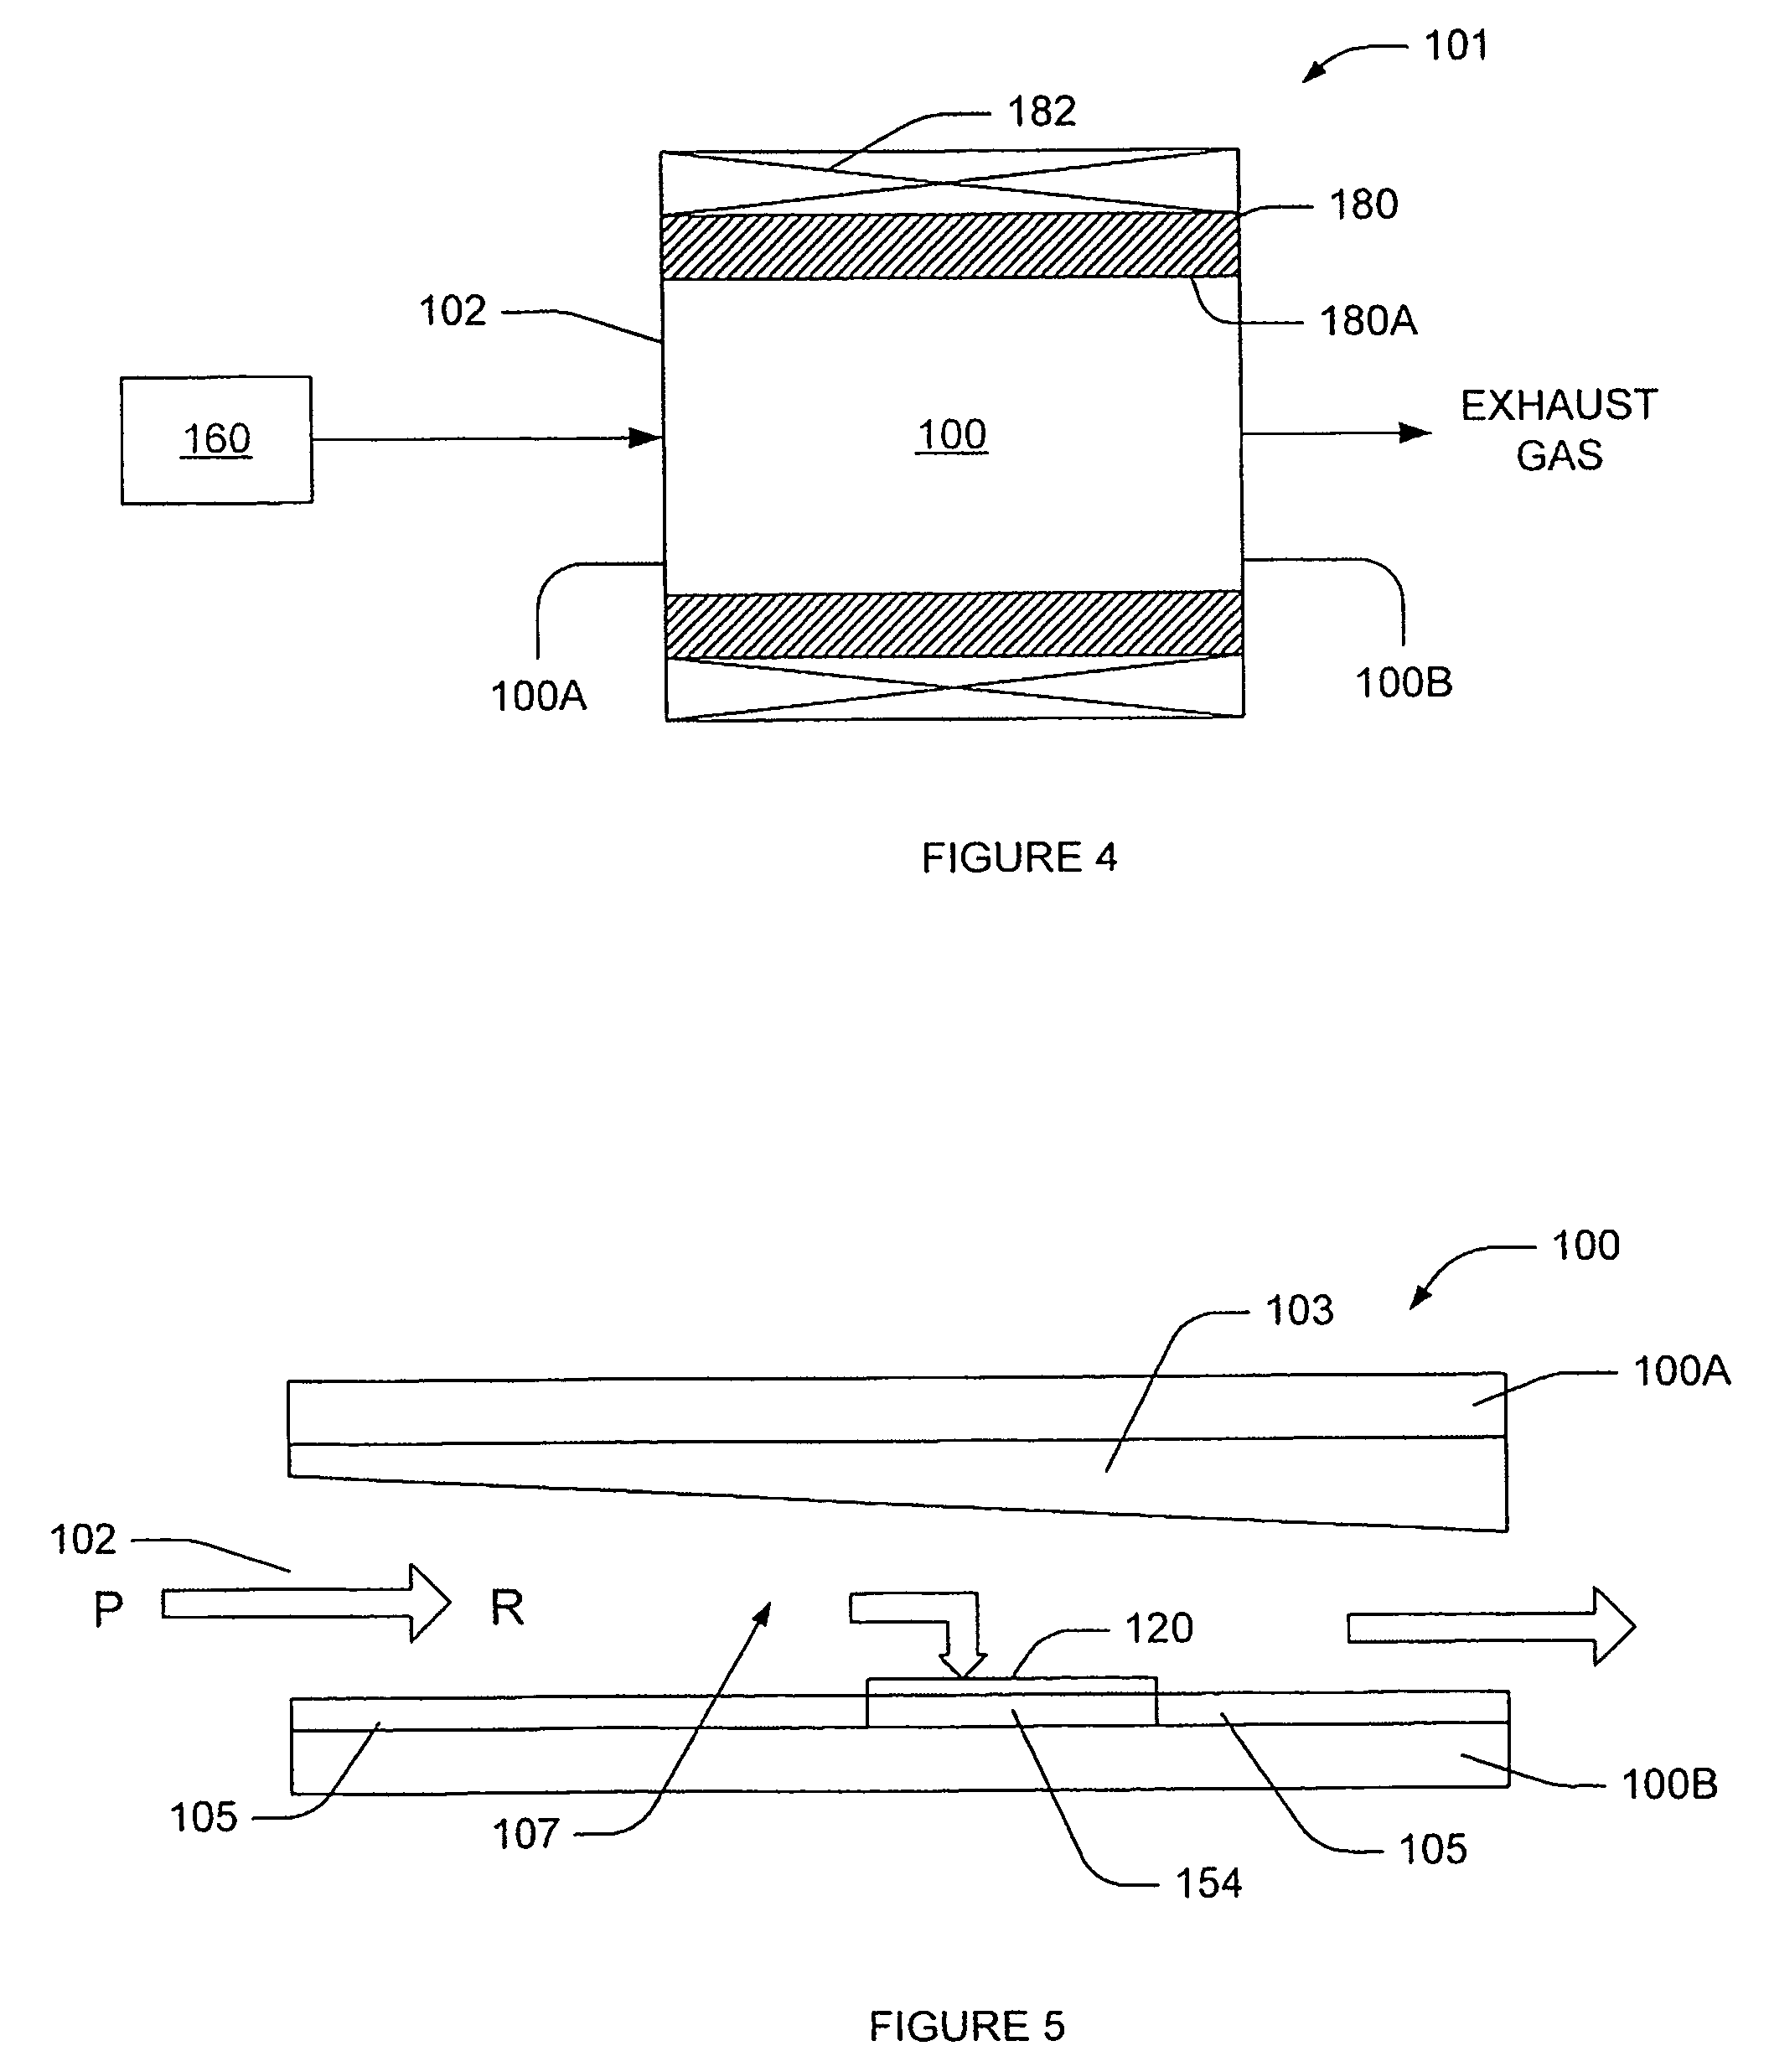 Sequential lithographic methods to reduce stacking fault nucleation sites and structures having reduced stacking fault nucleation sites